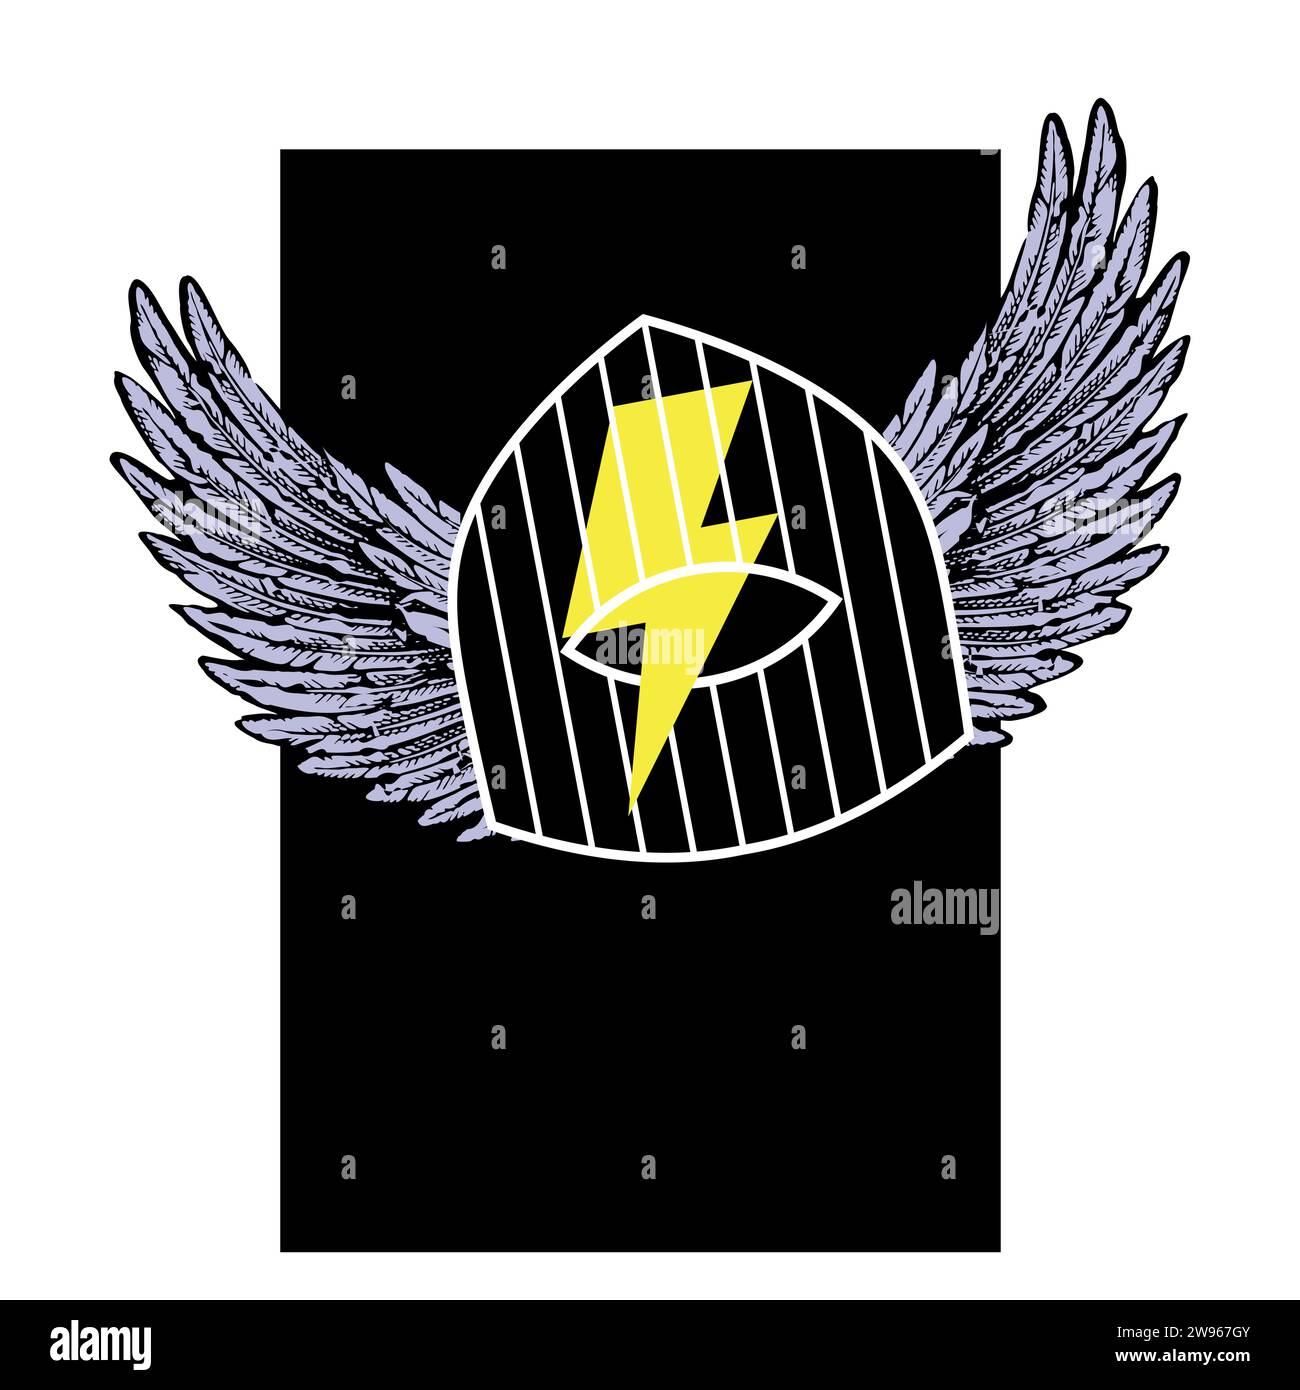 Design for a cage t-shirt with wings and the yellow thunderbolt symbol ...